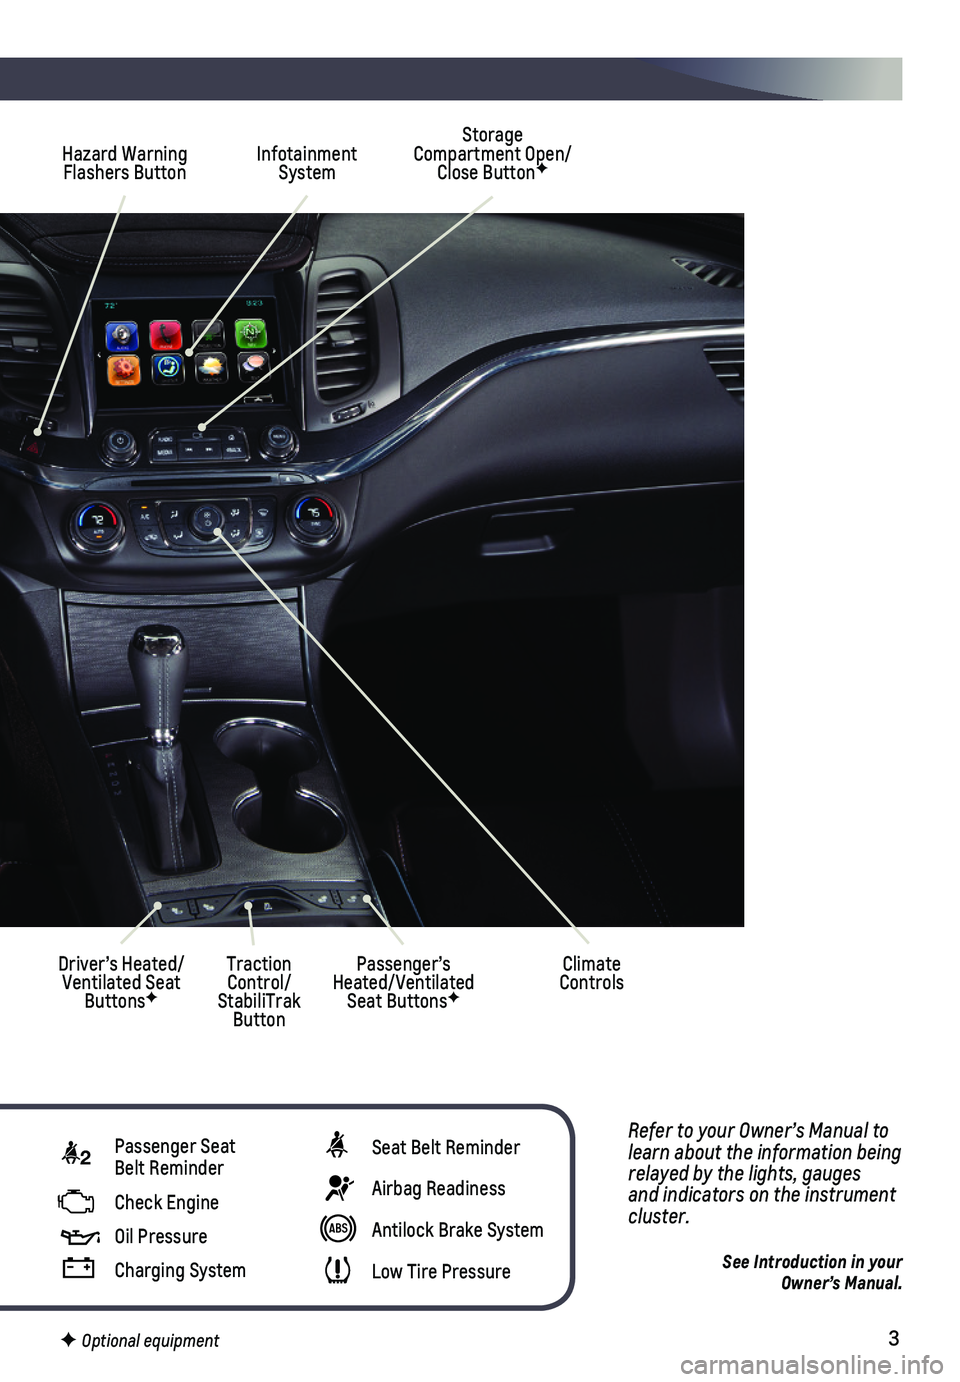 CHEVROLET IMPALA 2020  Get To Know Guide 3
Refer to your Owner’s Manual to learn about the information being relayed by the lights, gauges and indicators on the instrument cluster.
See Introduction in your  Owner’s Manual.
Hazard Warning